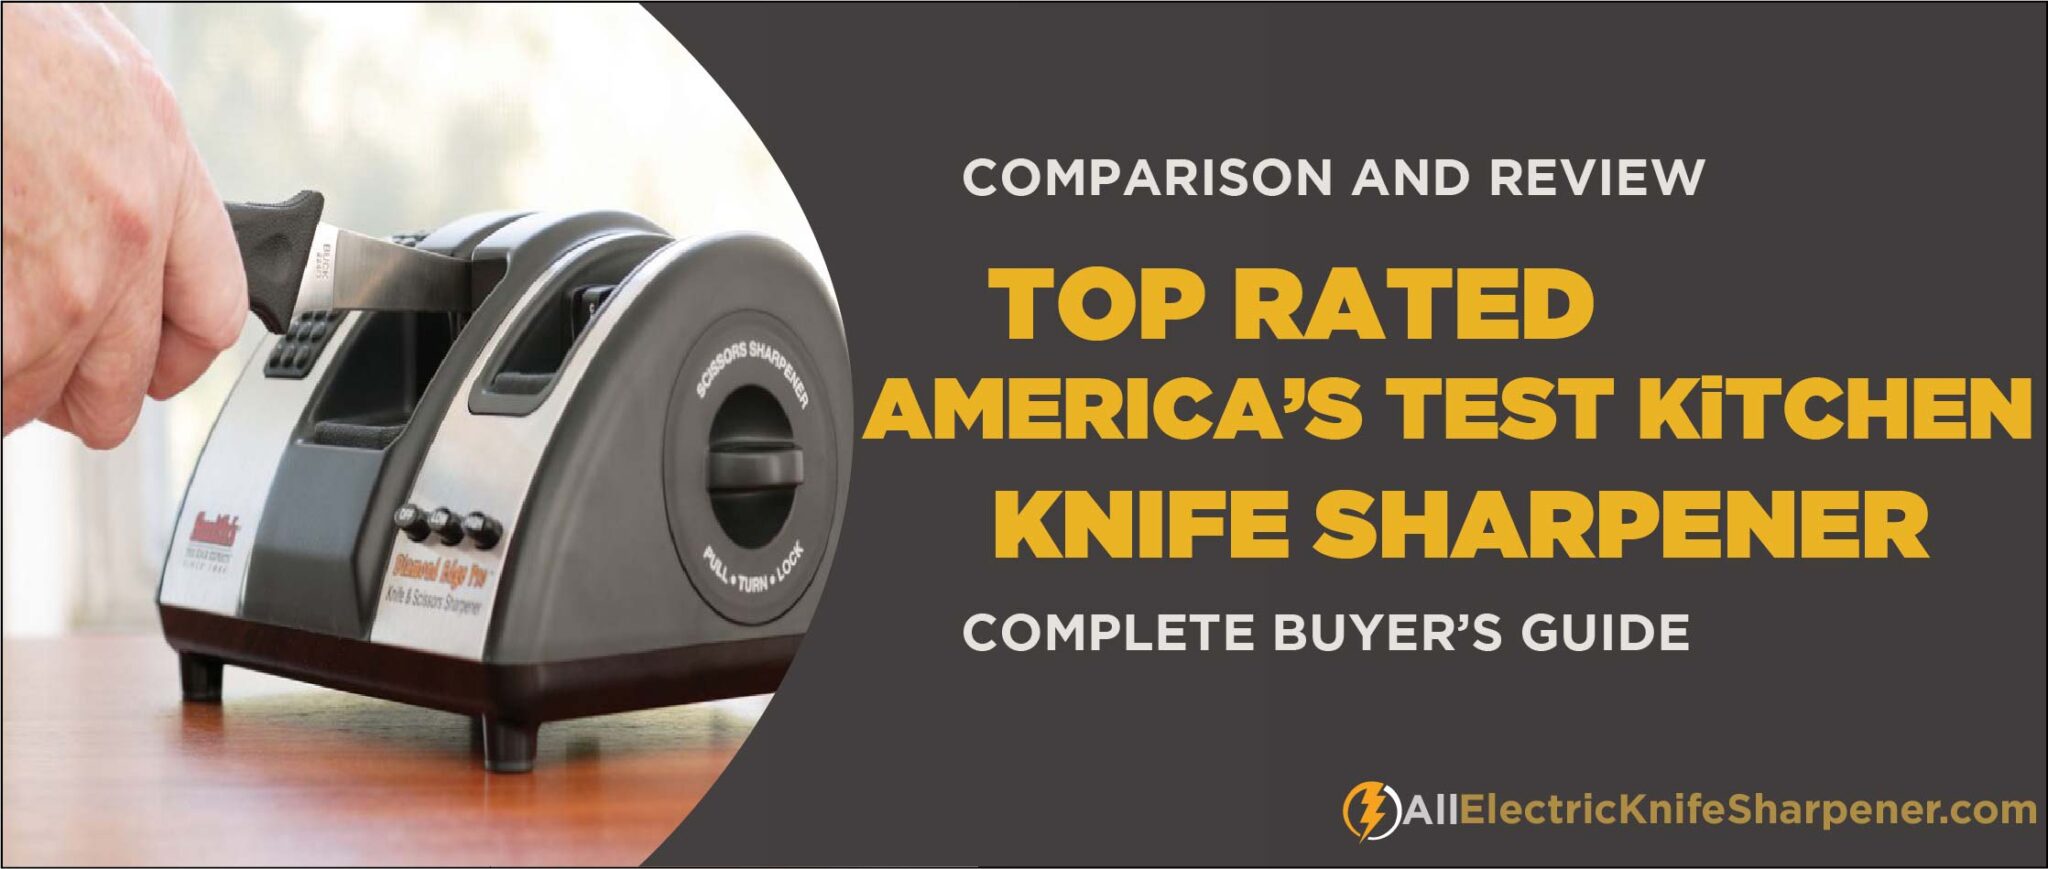 Best Electric Knife Sharpener America’s Test Kitchen-Transform Your Knives Into as Good as the Day You Bought Them